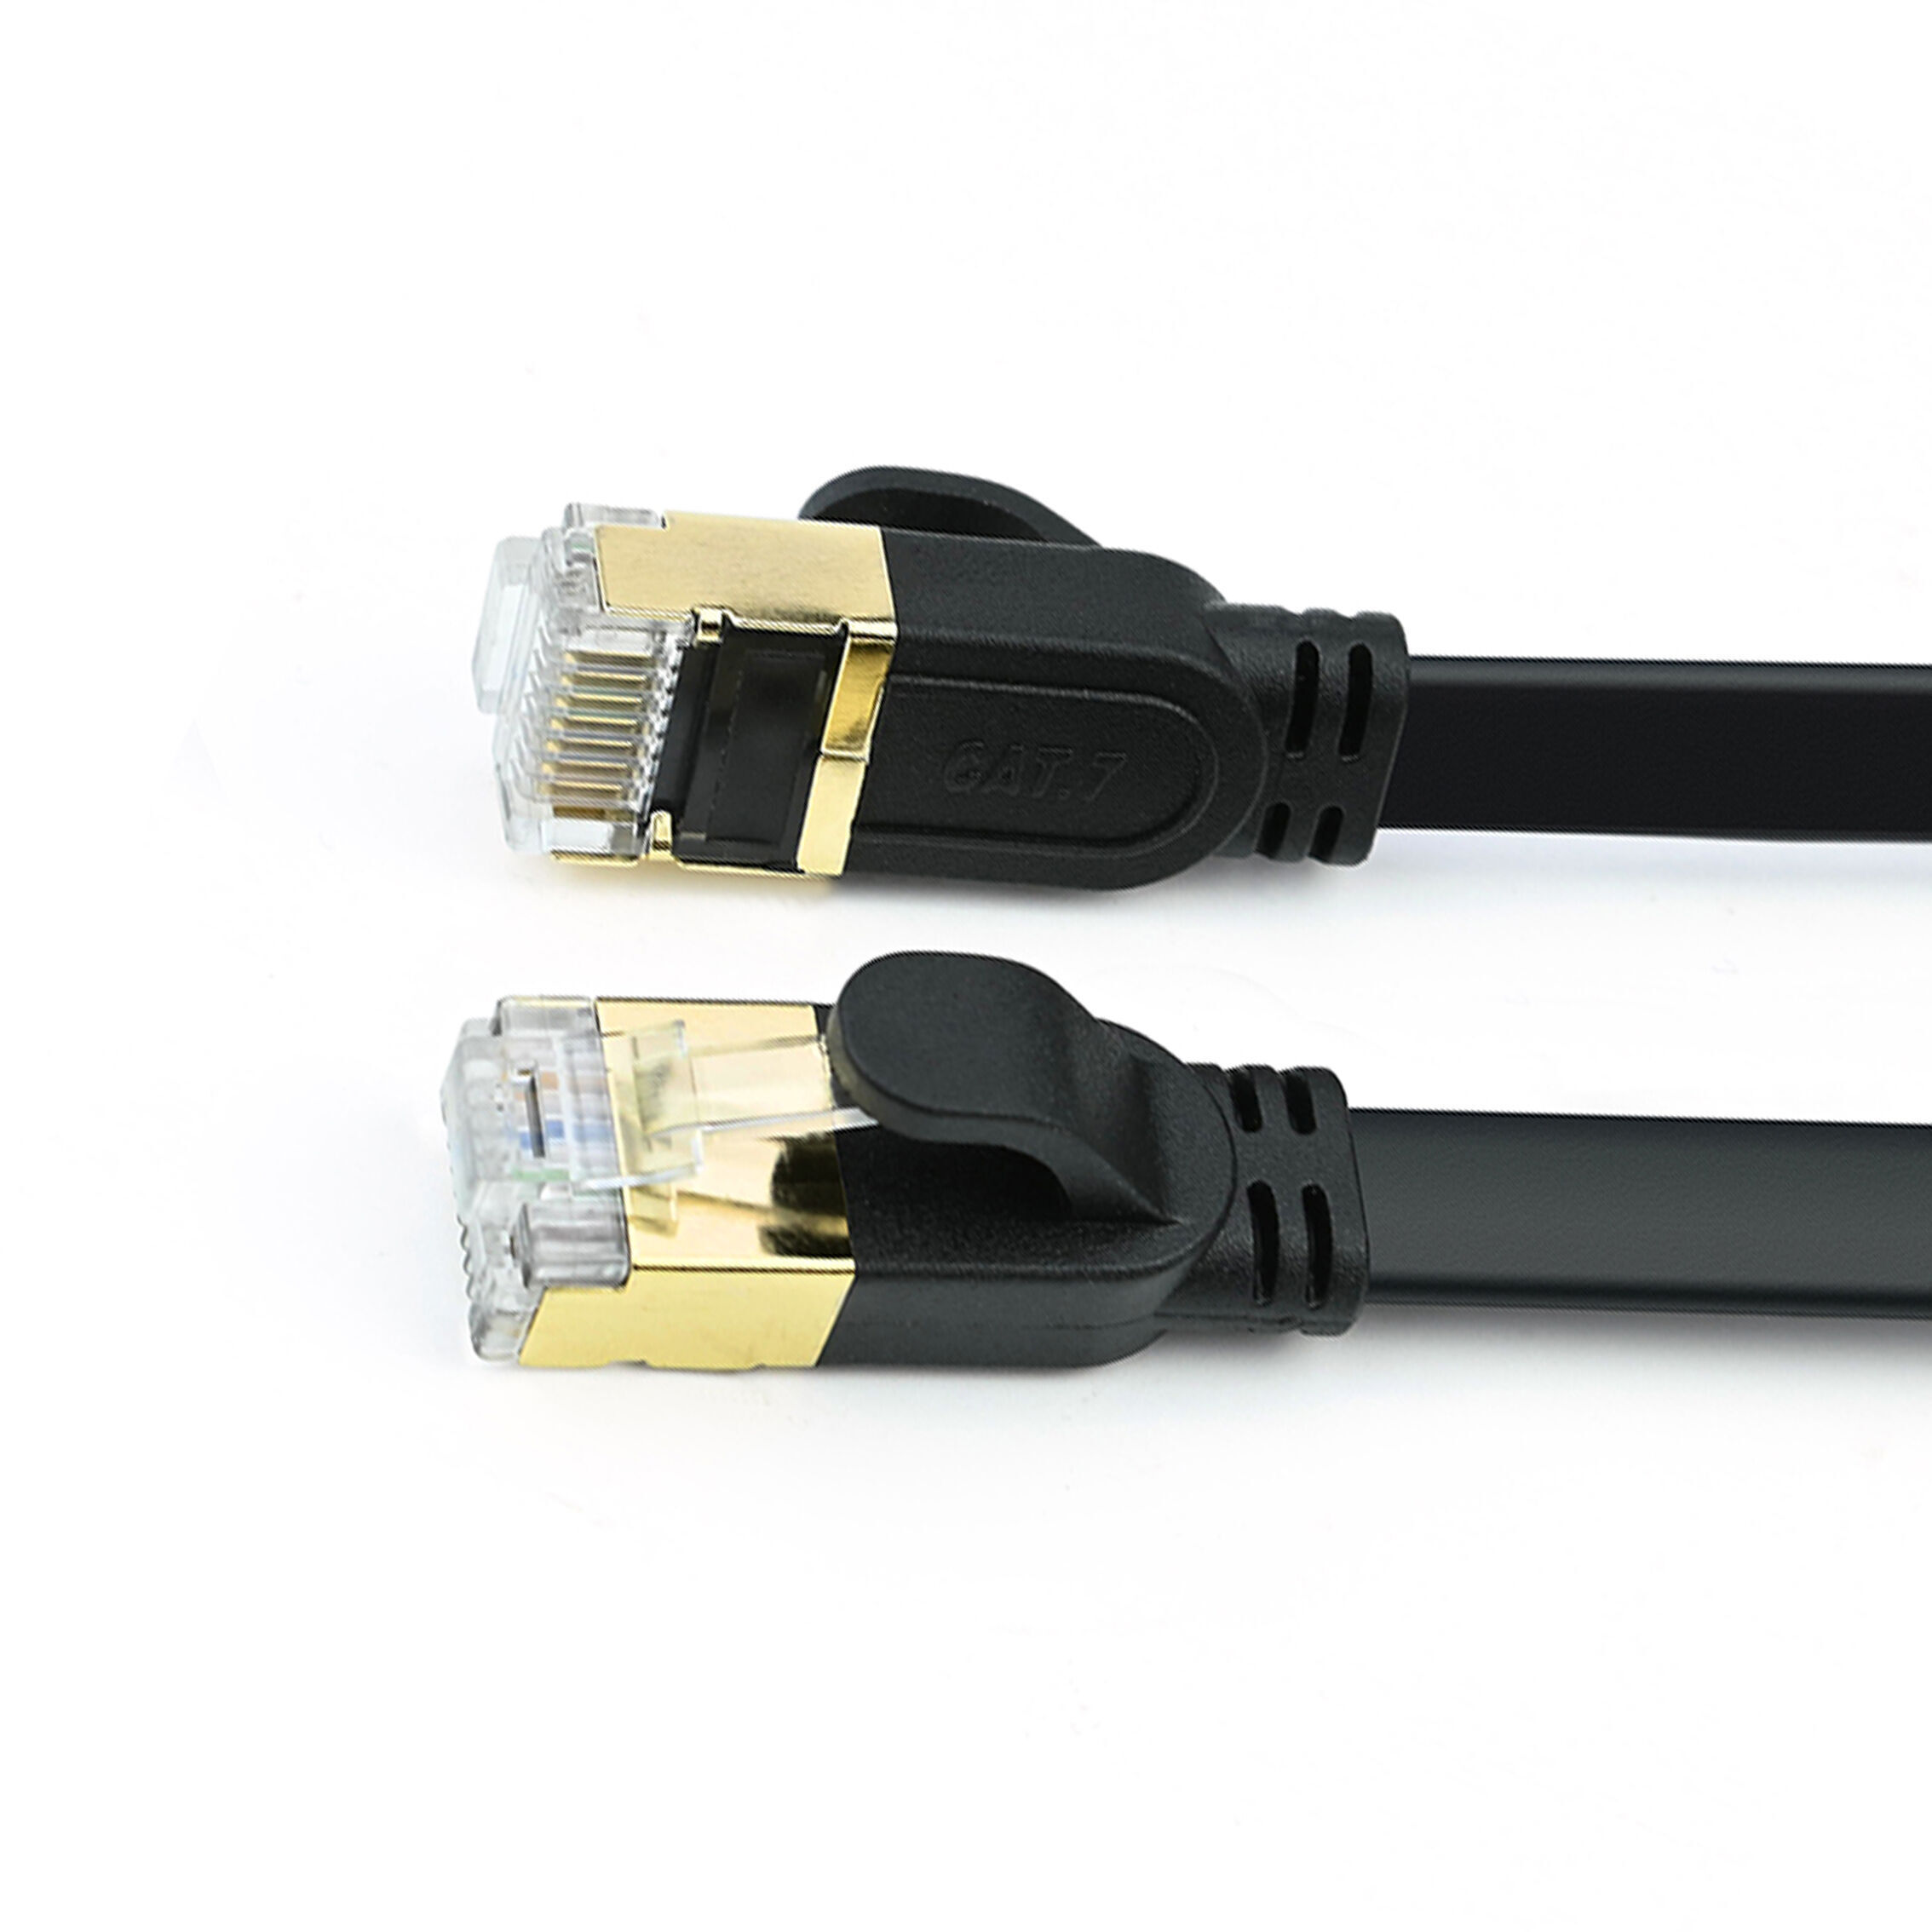 Cat7 Ethernet Cable 10FT-Black-10Gbps Shielded & GND Internet Network  Cord,High Speed Ultra Slim Cat 7 Flat Patch Cable